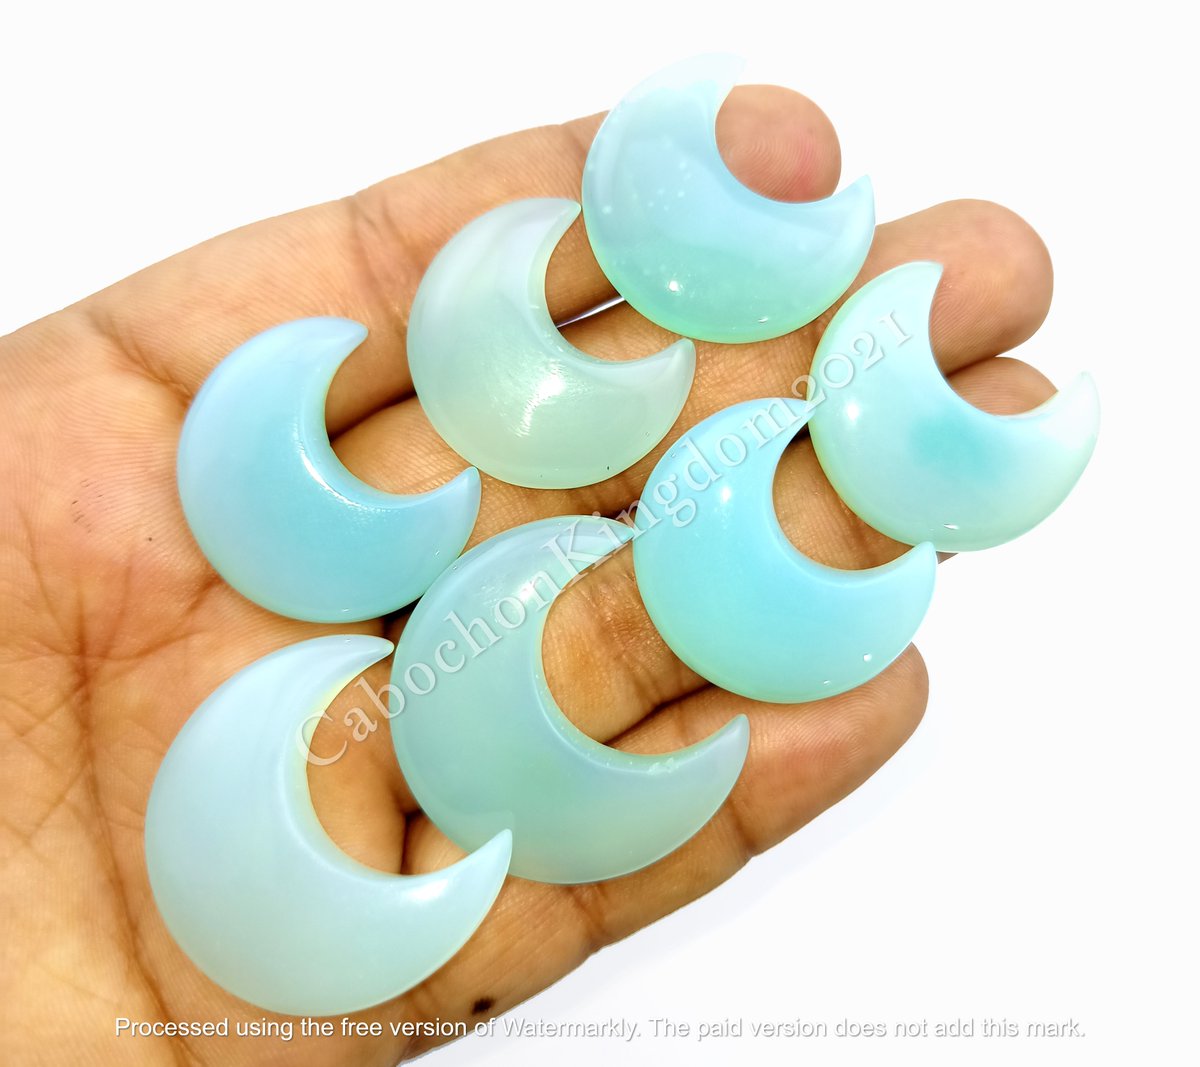 Natural Aqua Chalcedony/Onyx Crescent Moon Gemstone Cabochon

$2.99 Per Piece
Size 20 to 35mm Approx
Free Drilling Service Available On Request
Shipping$6 Combine Shipping Available

#aquachalcedony #aquachalcedonymoon #aquaonyx #aquaonyxmoon #cresentmoon #onyx #onyxjewelry